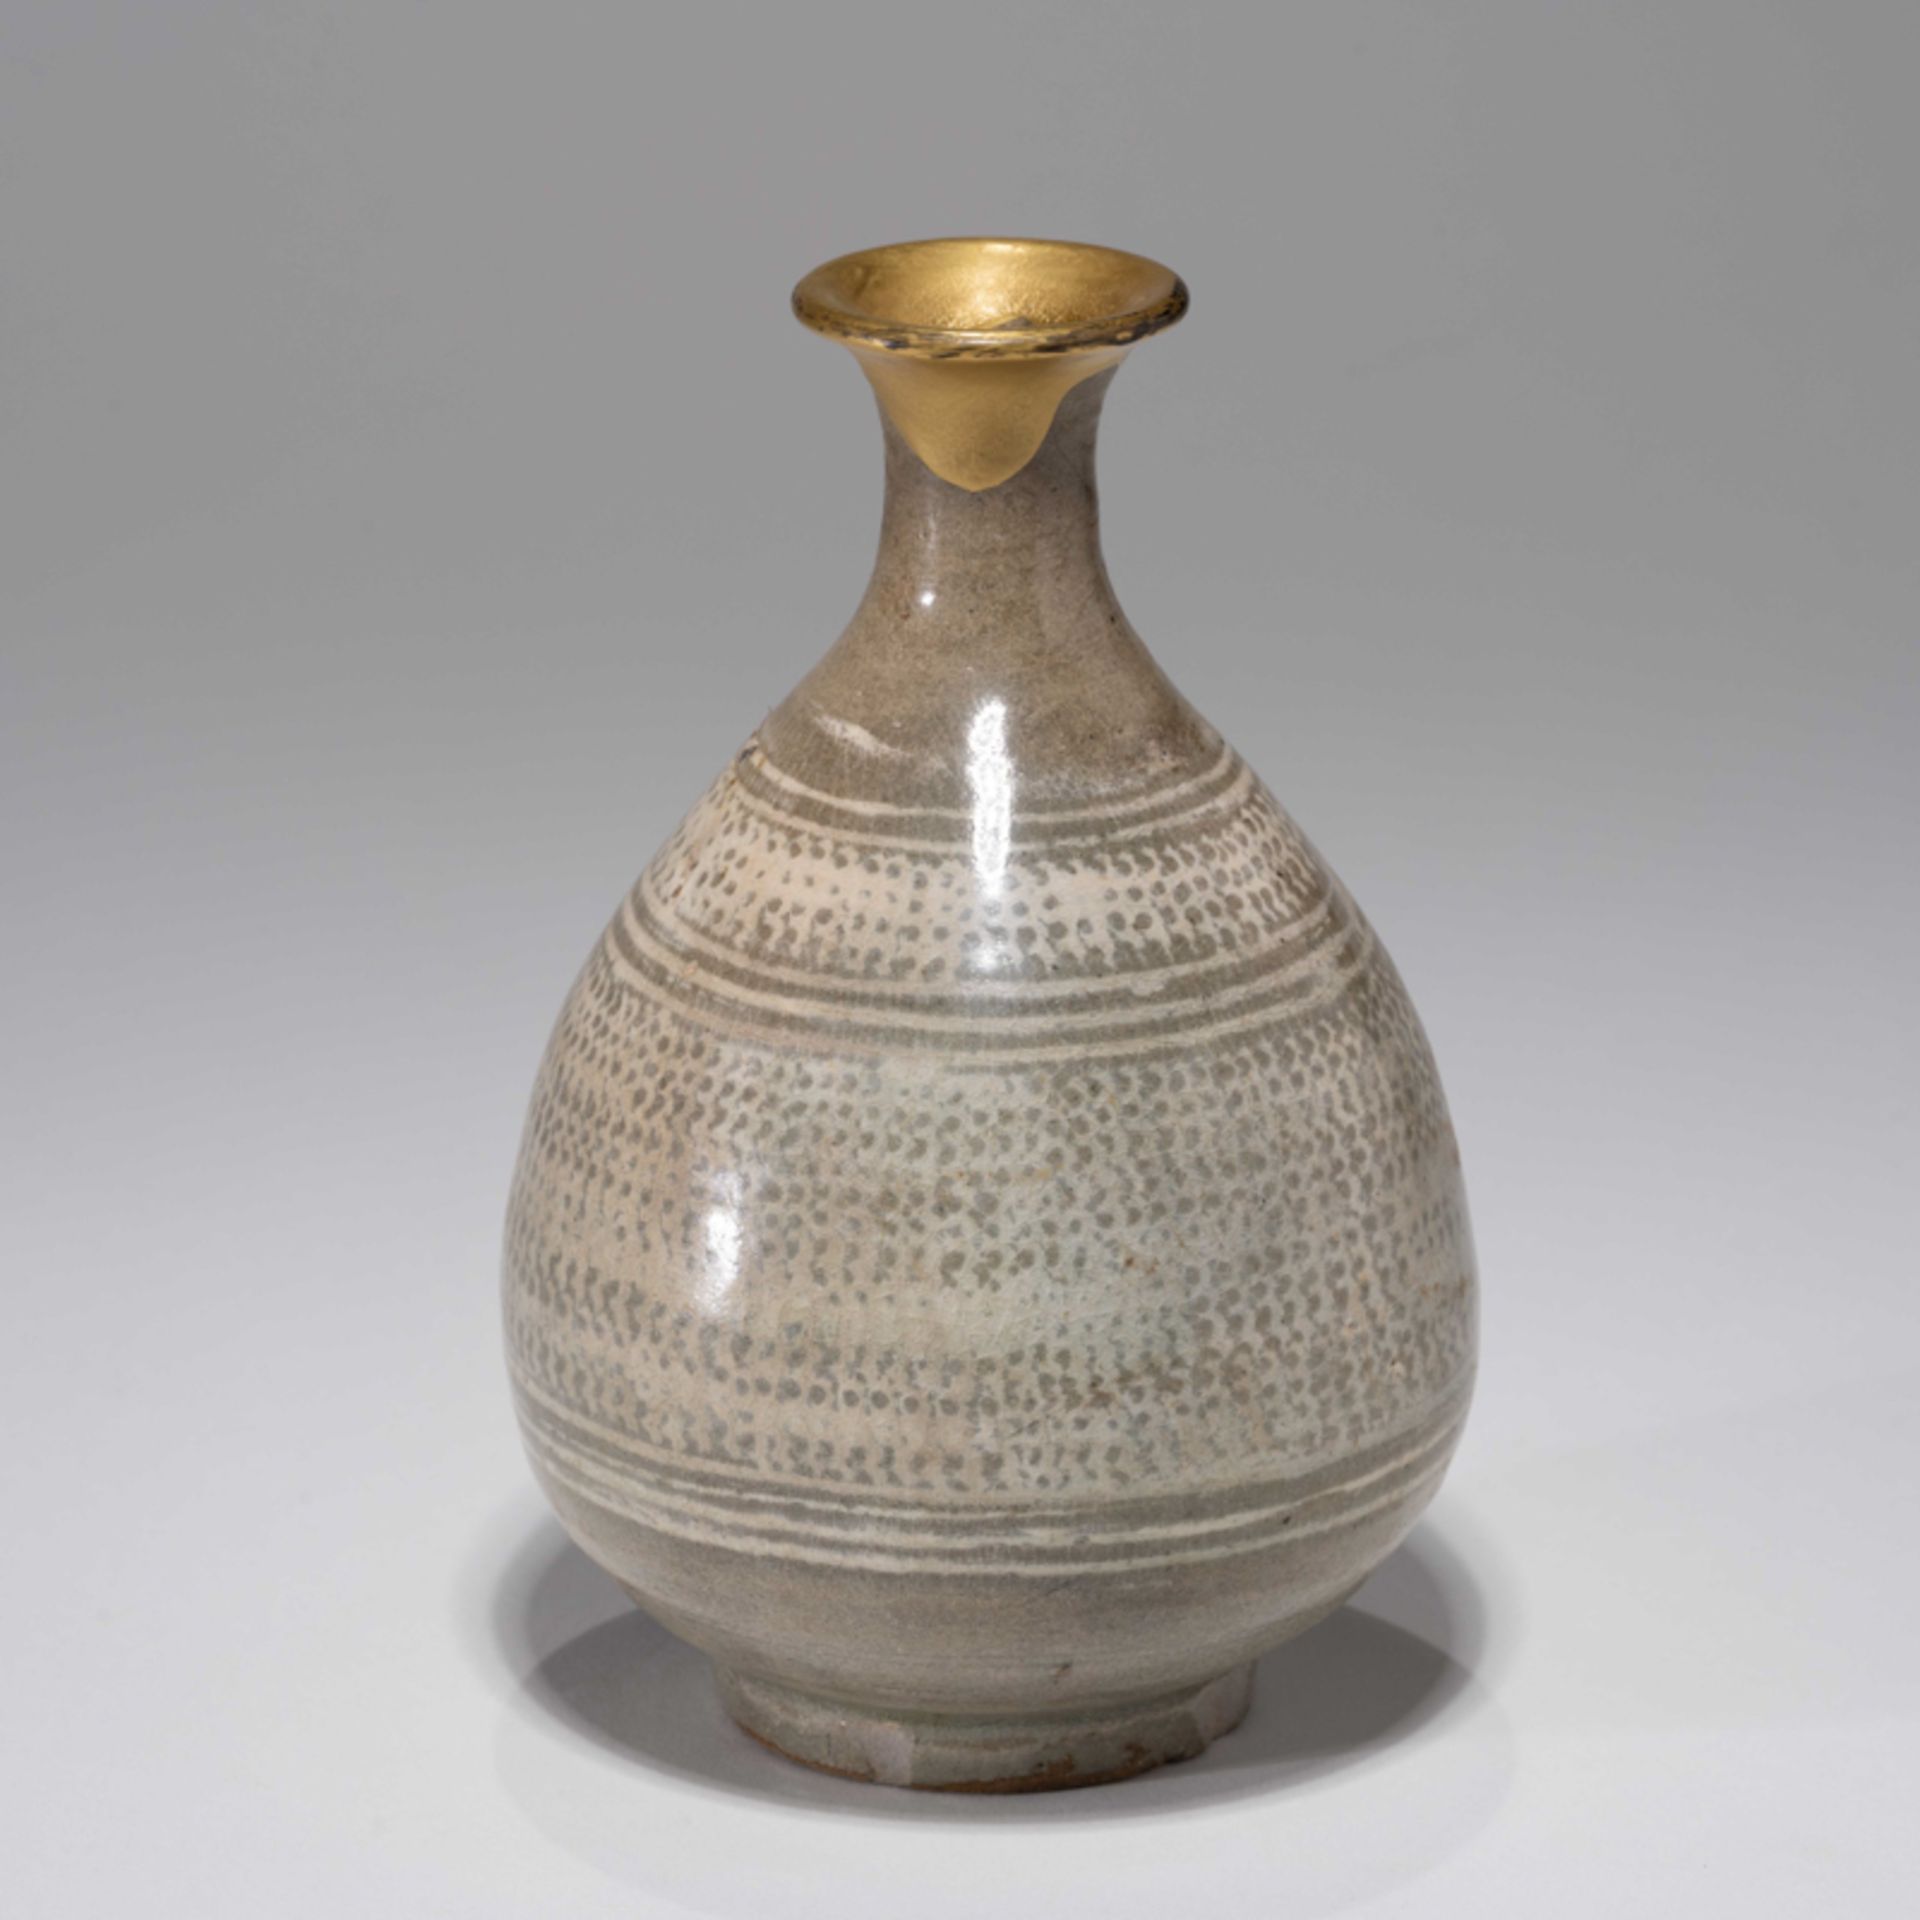 A KOREAN WHITE SLIP INLAID BUNCHEONG PEAR-SHAPED VASE, JOSEON DYNASTY - Image 3 of 8